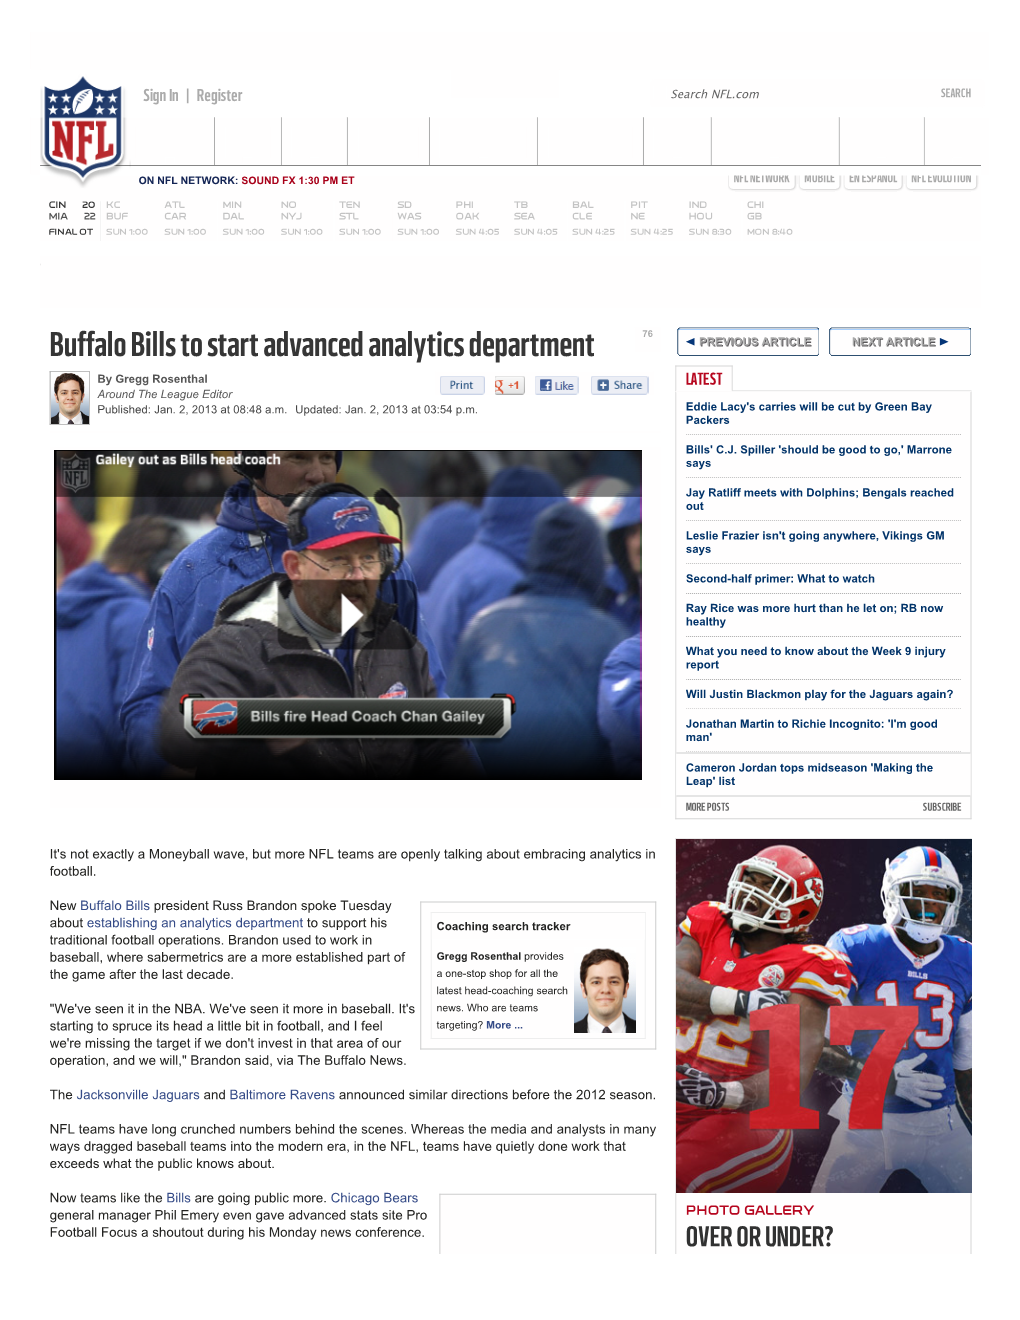 Buffalo Bills to Start Advanced Analytics Department PREVIOUS ARTICLE NEXT ARTICLE by Gregg Rosenthal LATEST Around the League Editor Published: Jan